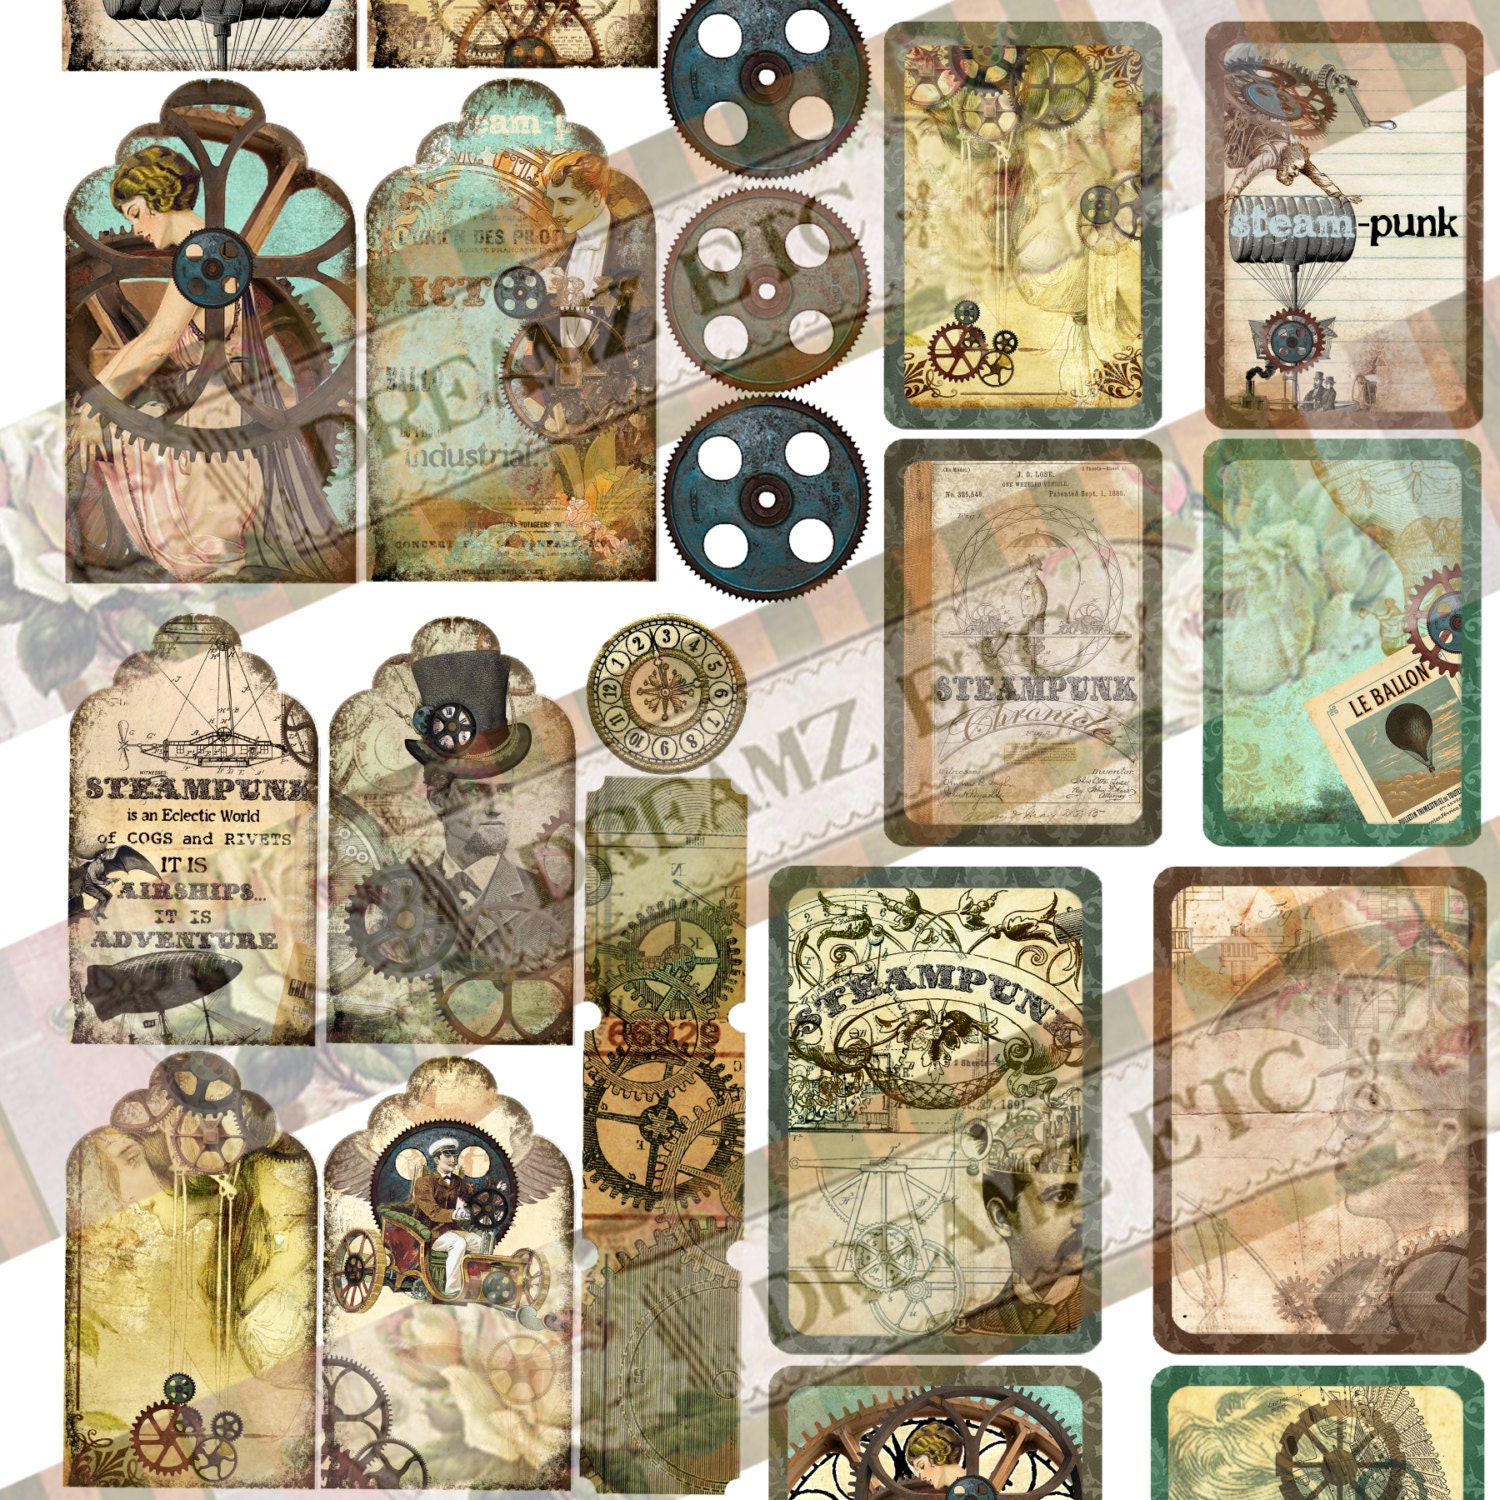 NEW! Digital Kit "STEAMPUNK CHRONICLES Ephemera" -  Great for Scrapbooking, Journals, Card Making and Mixed Media Projects